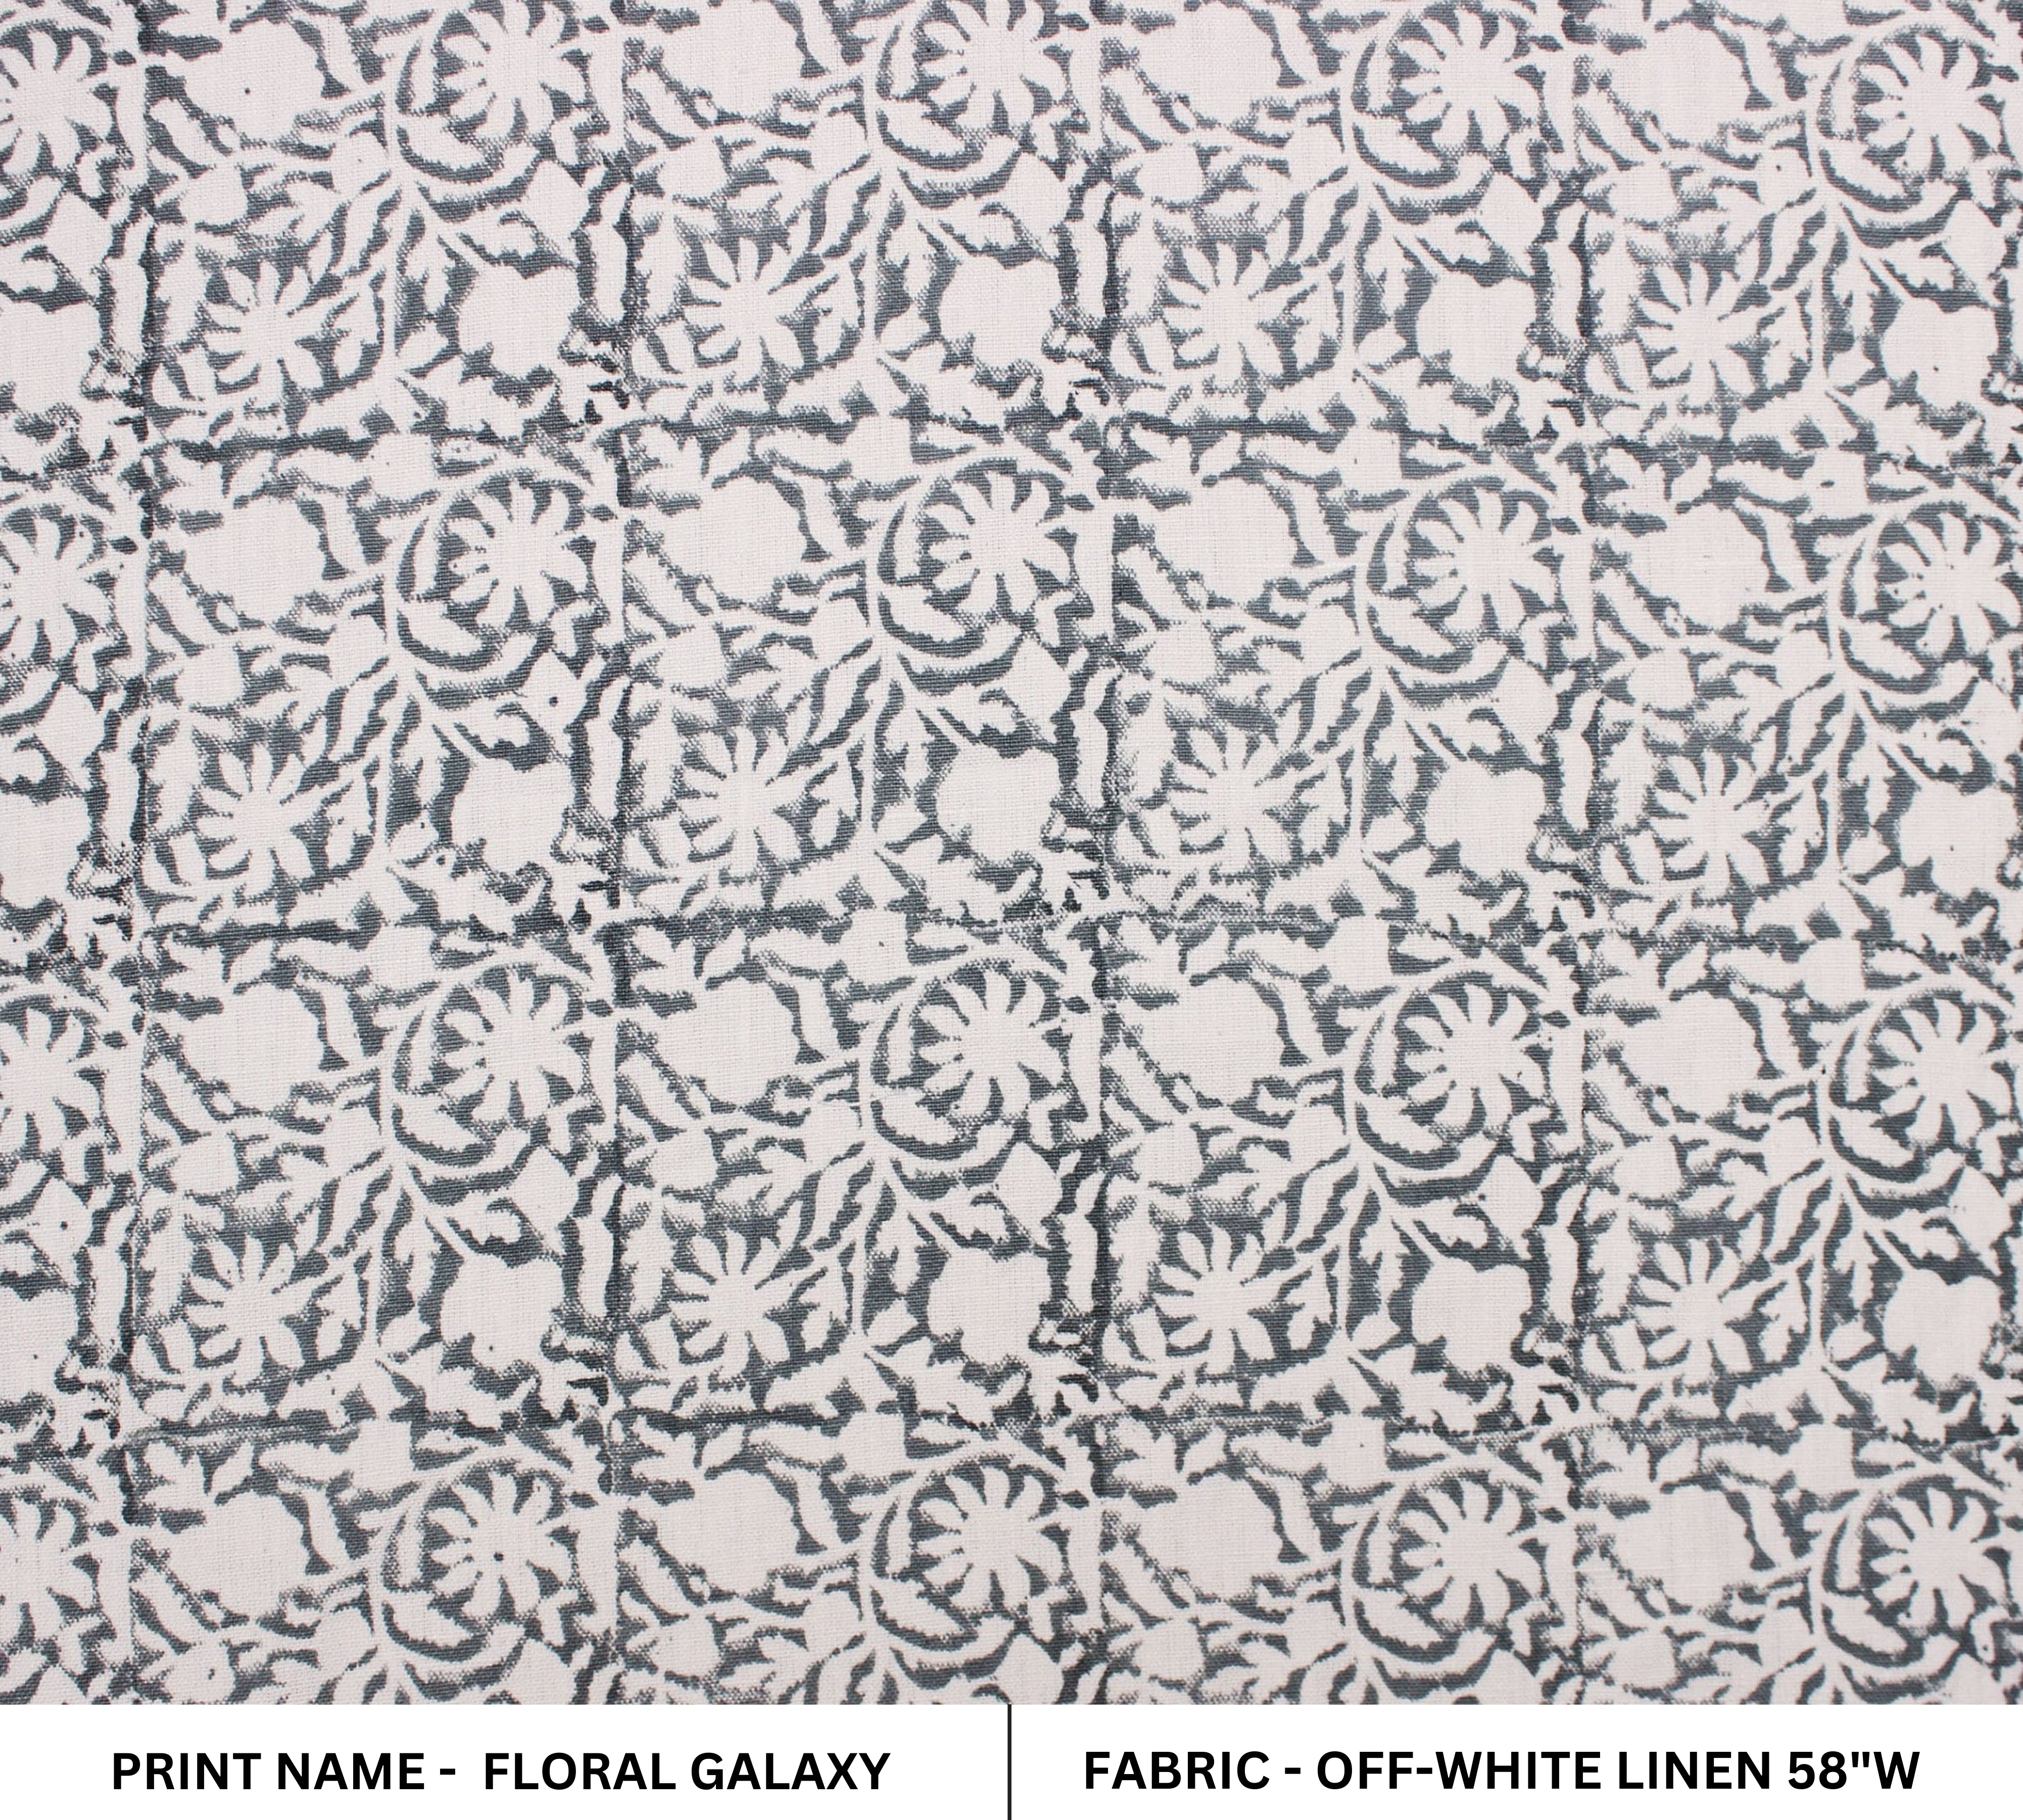 Floral Galaxy  Designer Fabric, Linen White Fabric, Block Print Fabric, Fabric By The Yard, Pillow Cover Fabric, Fabric For Upholstery